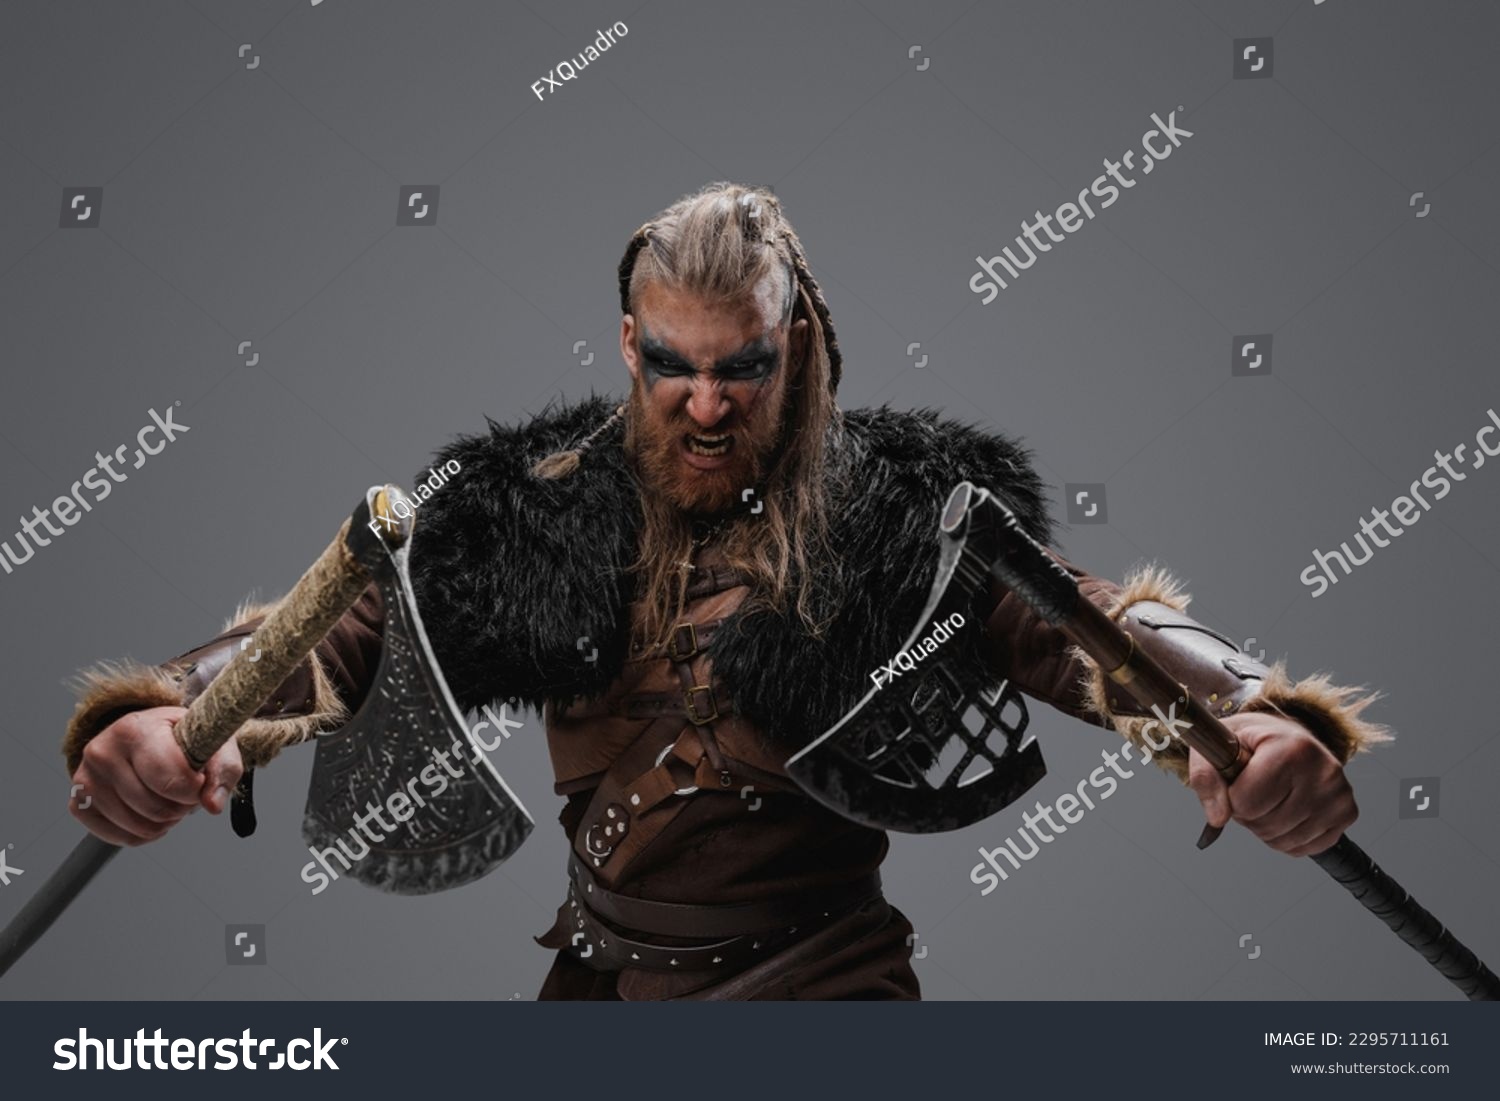 Portrait of fierce viking from past with dual axes against gray background. #2295711161